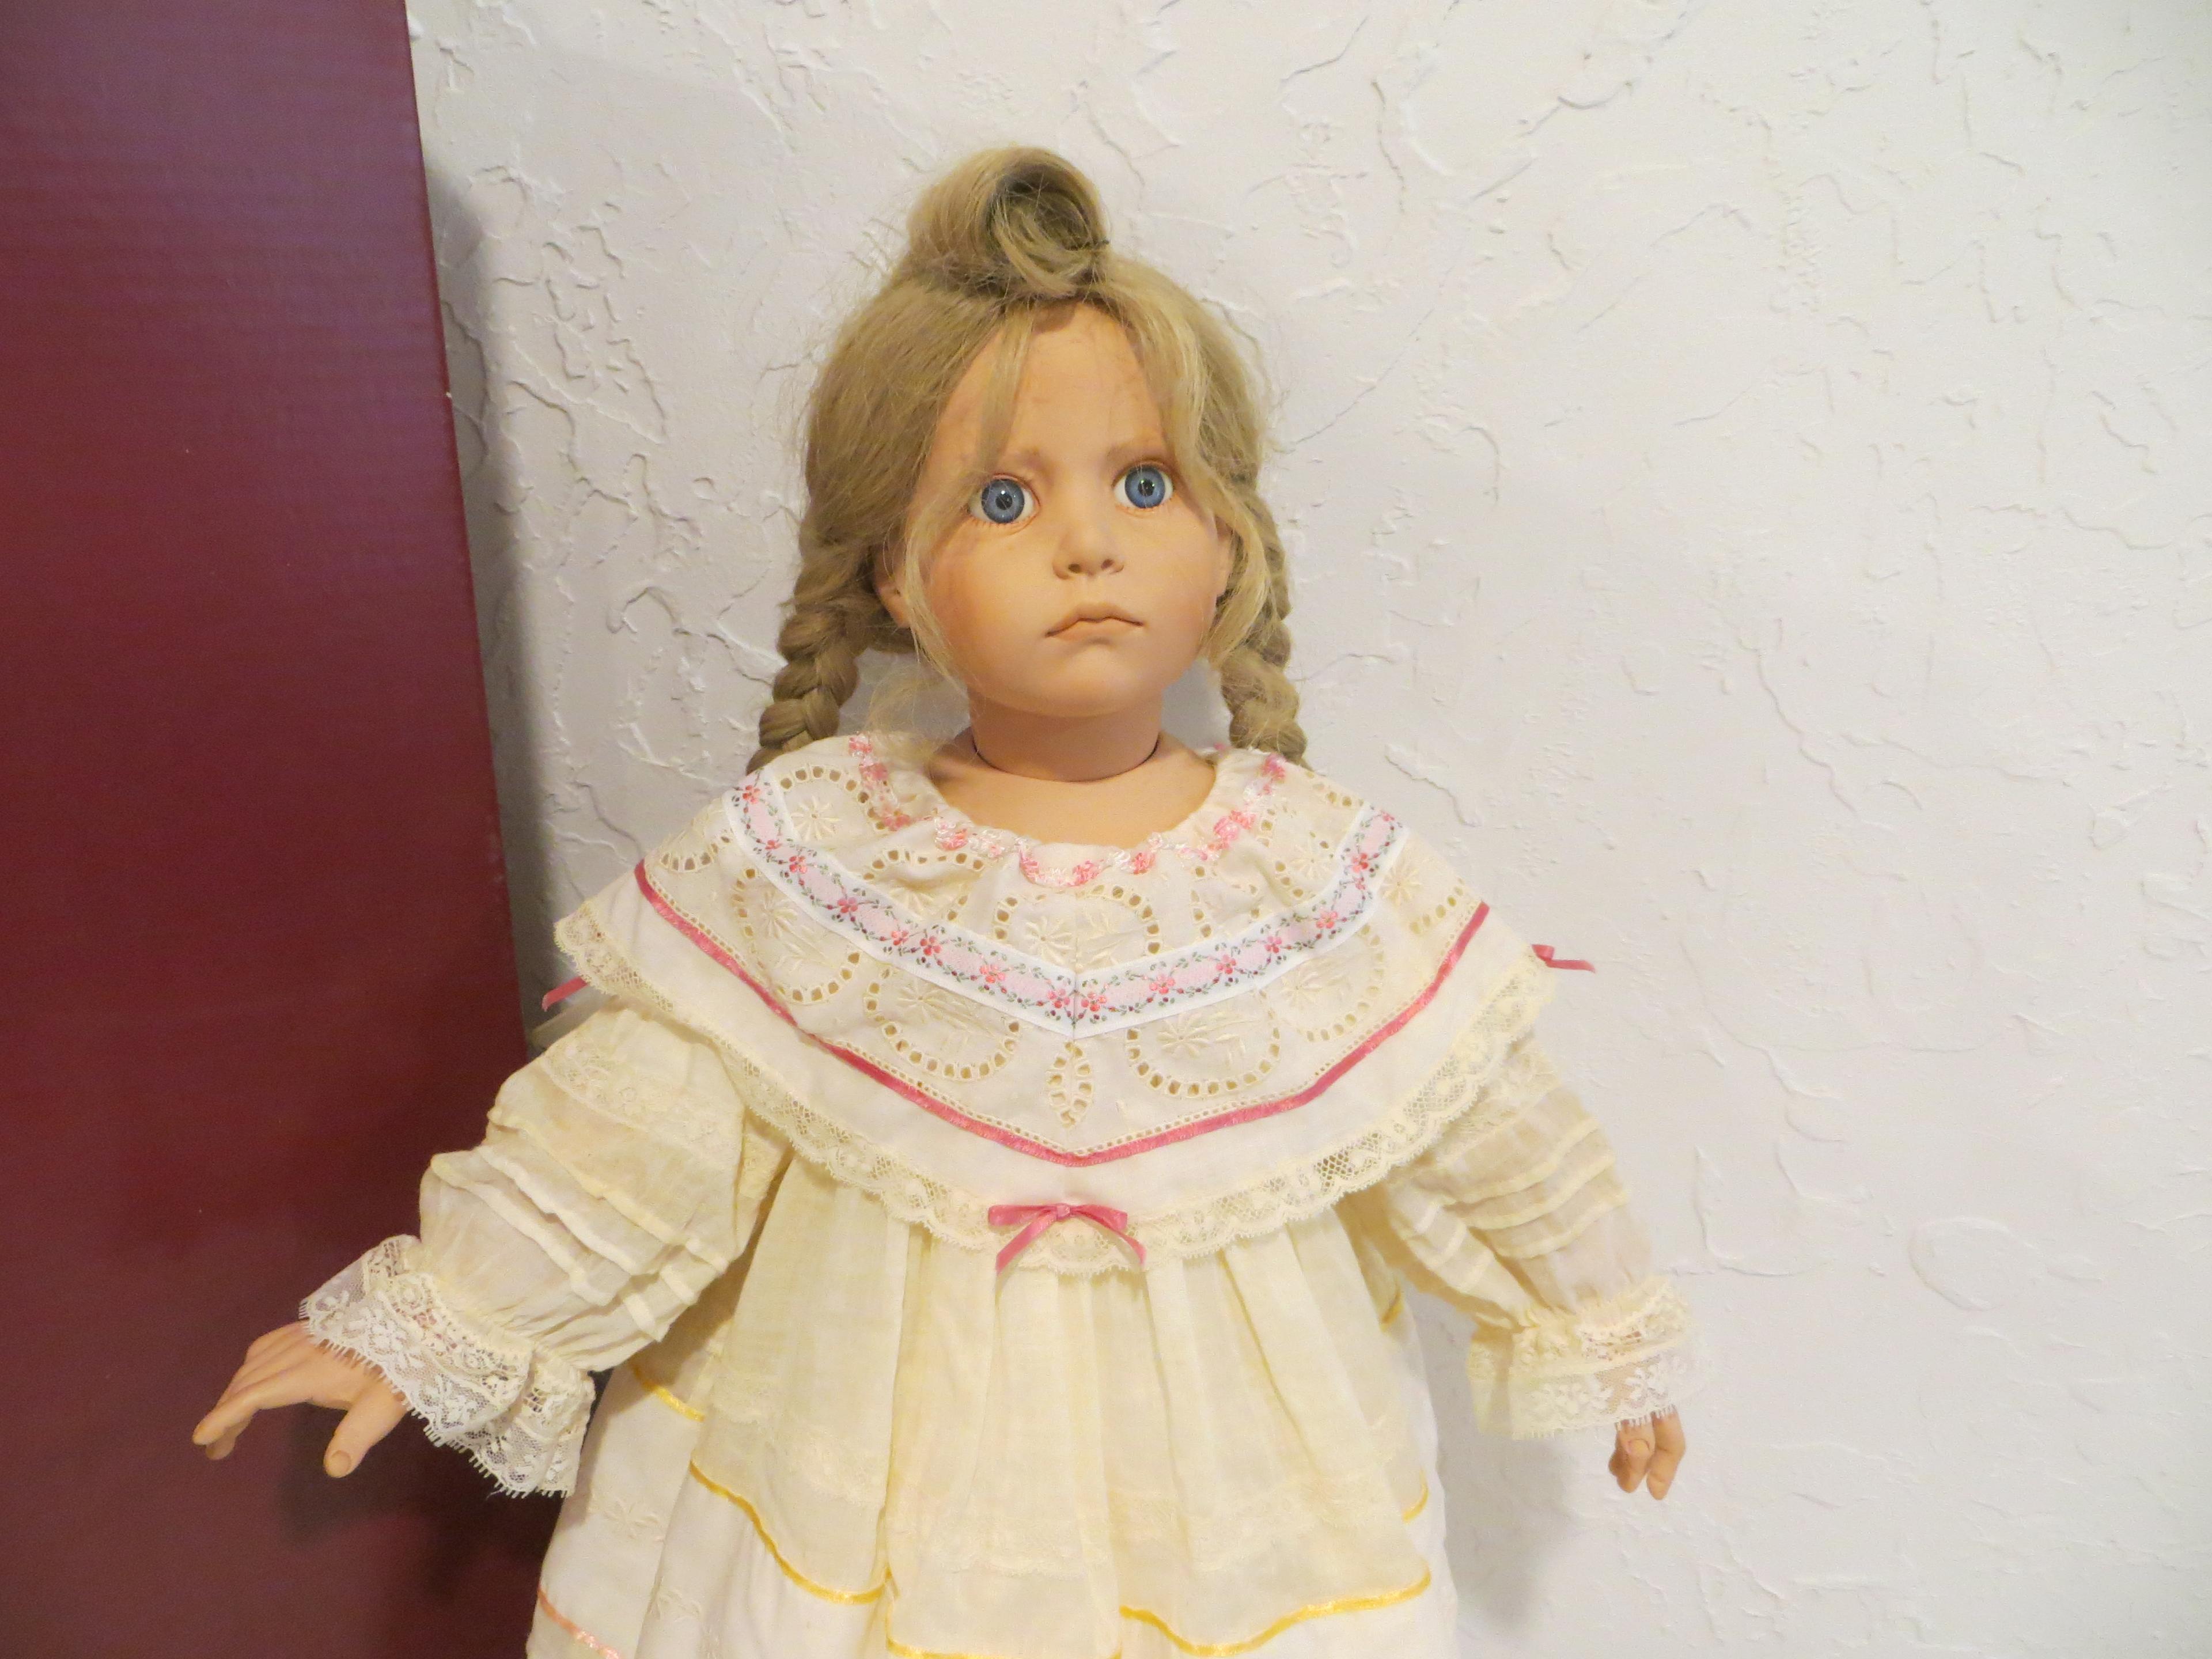 LE Hildegard Gunzel Collection by Alexander Doll Tricia Doll #1550 of 2000 wit